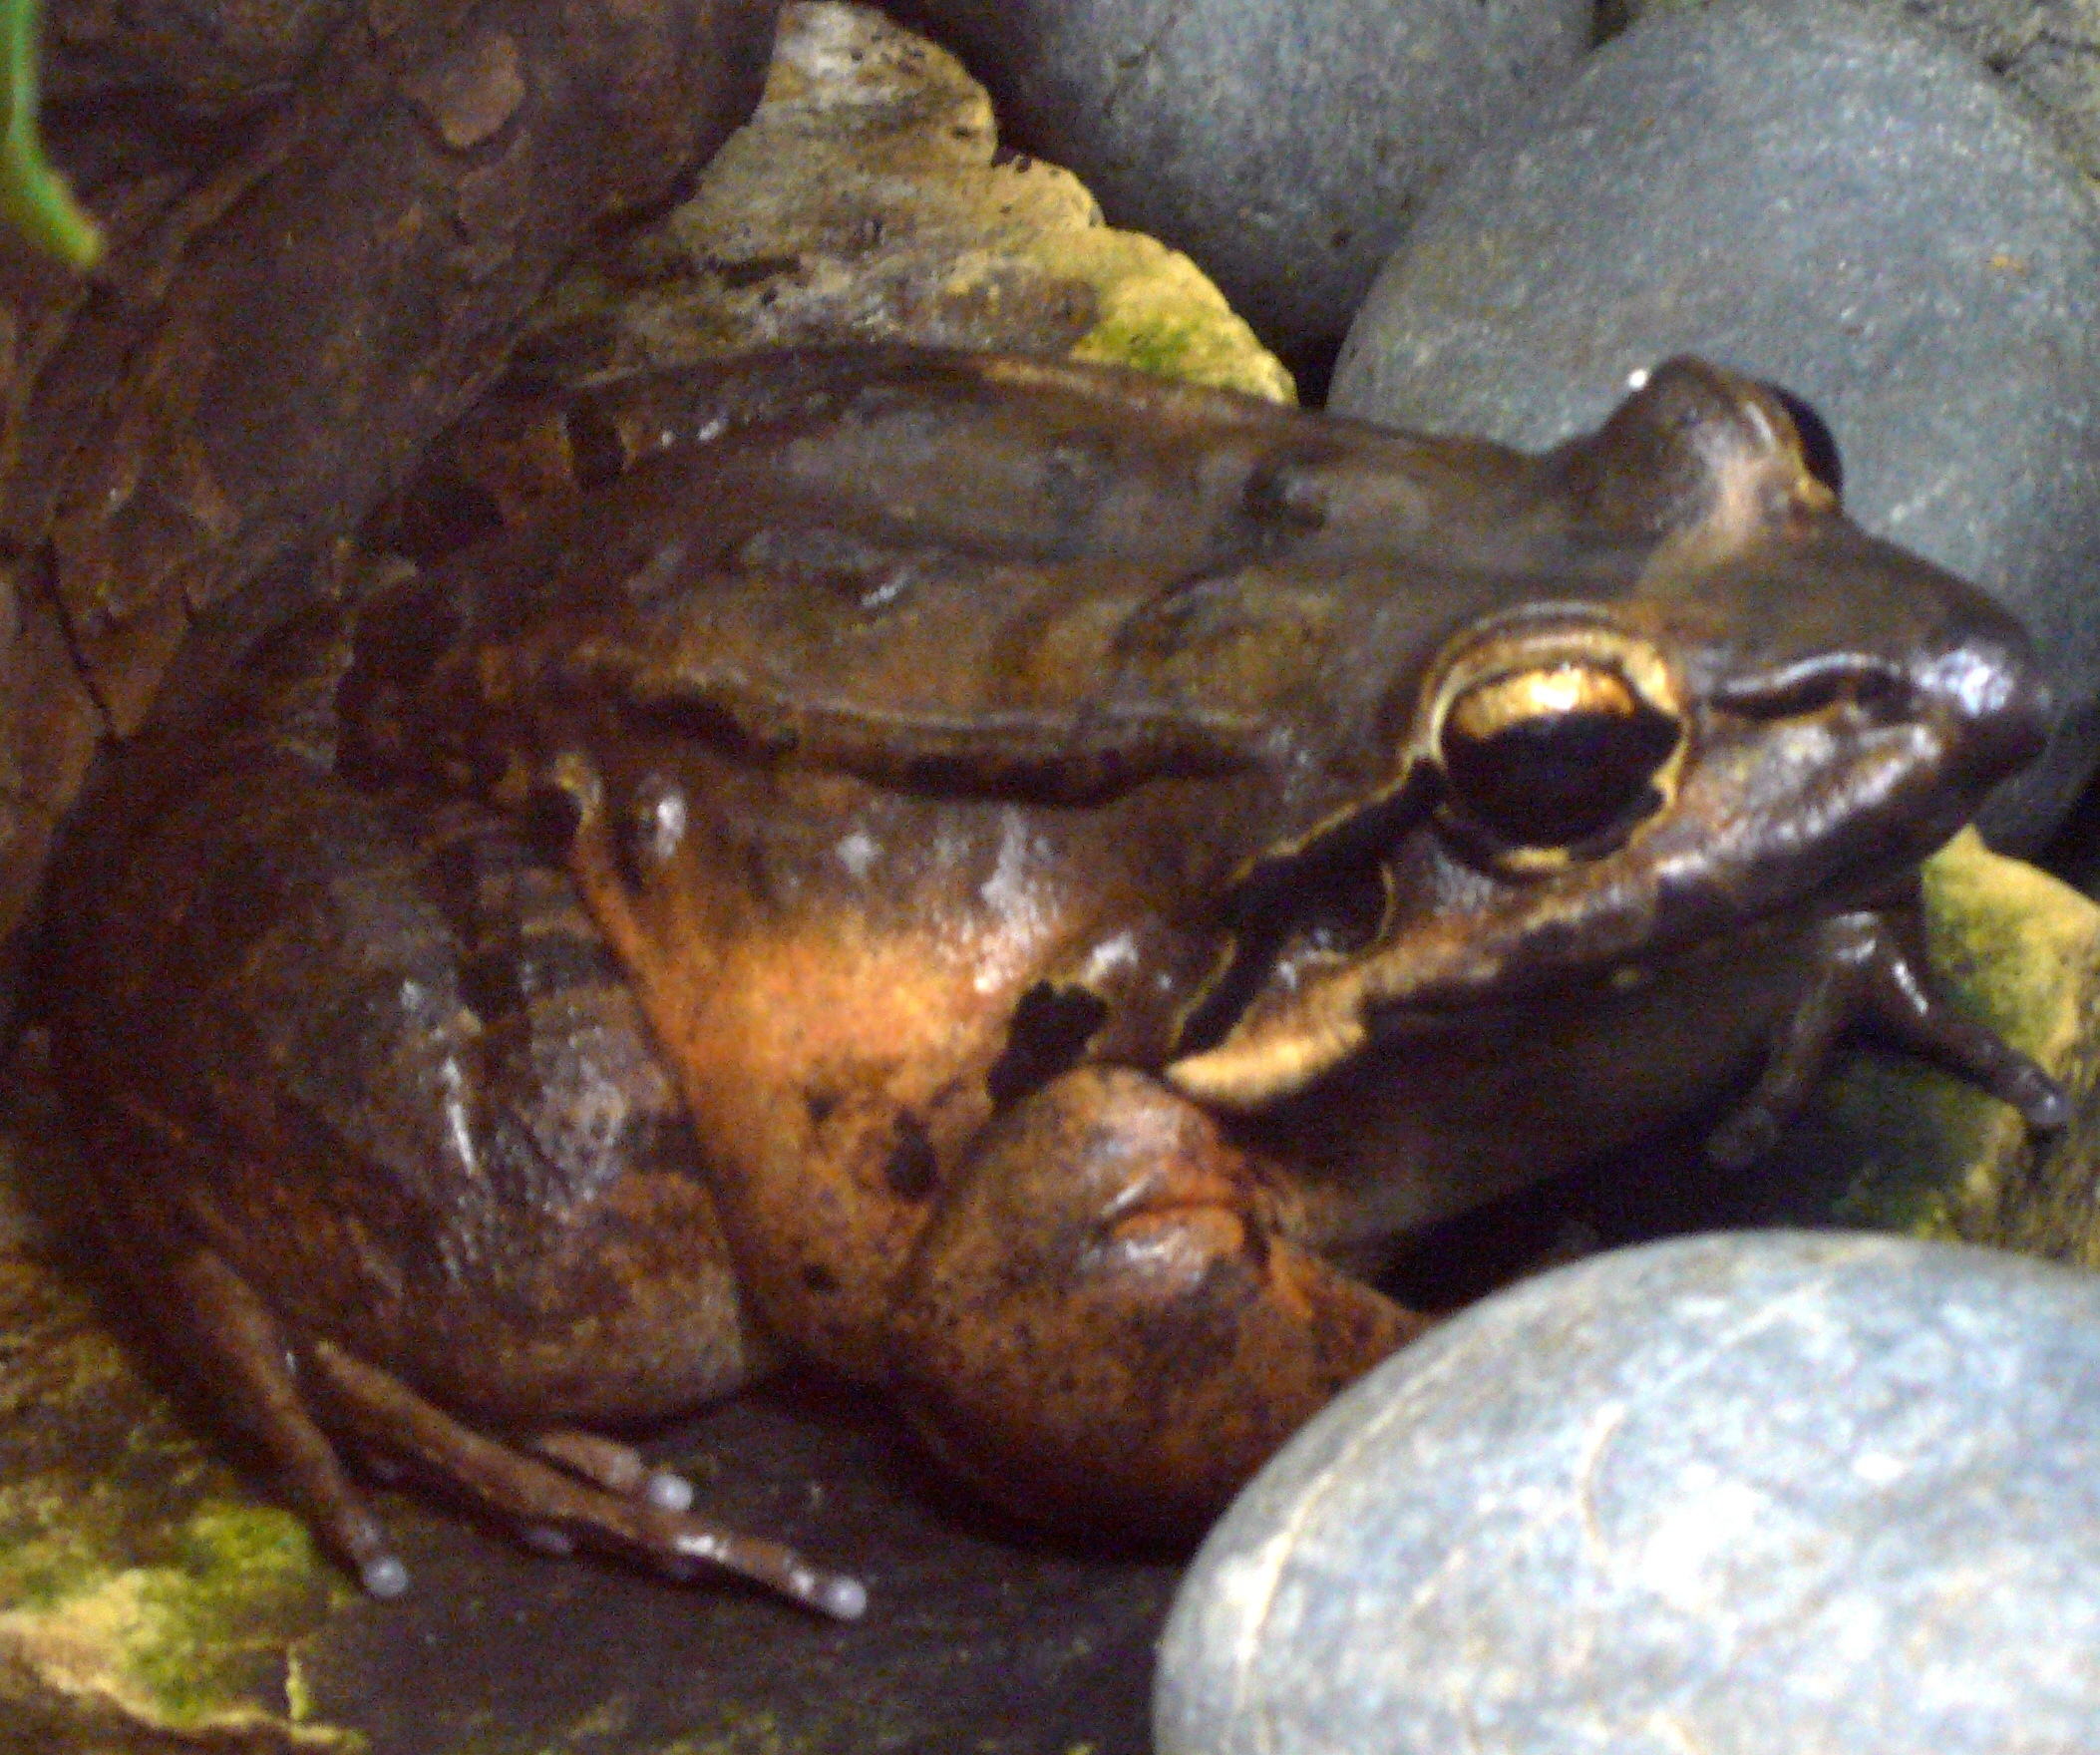 The island of Monstserrat is home to a remarkable giant amphibian, the  'Mountain Chicken' (Leptodactylus fallax). It is the second largest species of frog in the world.